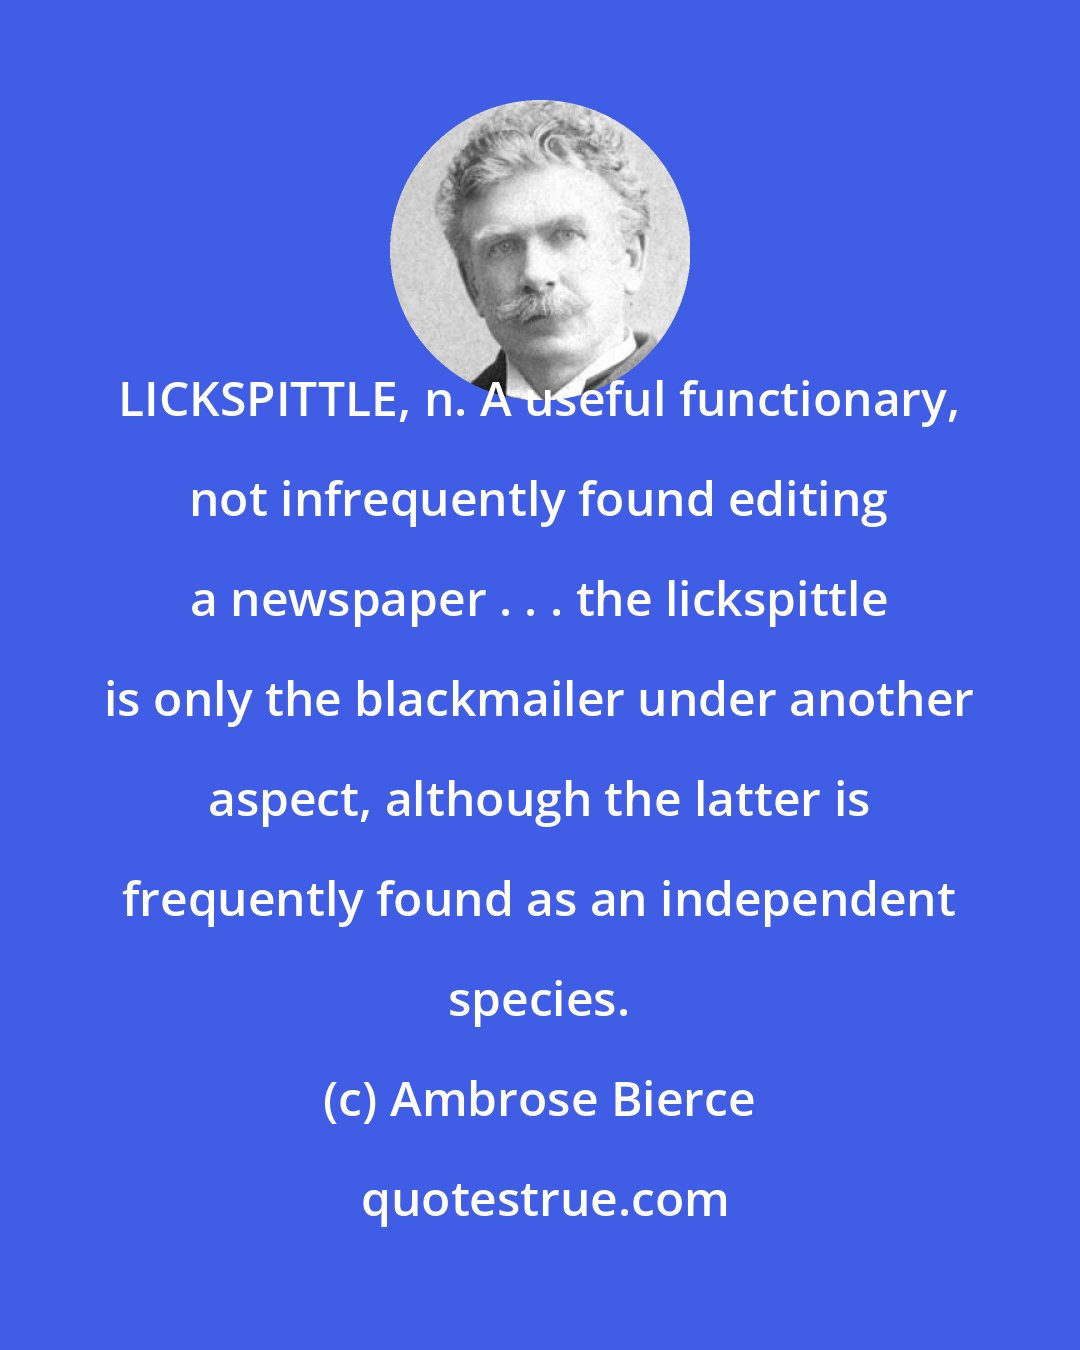 Ambrose Bierce: LICKSPITTLE, n. A useful functionary, not infrequently found editing a newspaper . . . the lickspittle is only the blackmailer under another aspect, although the latter is frequently found as an independent species.